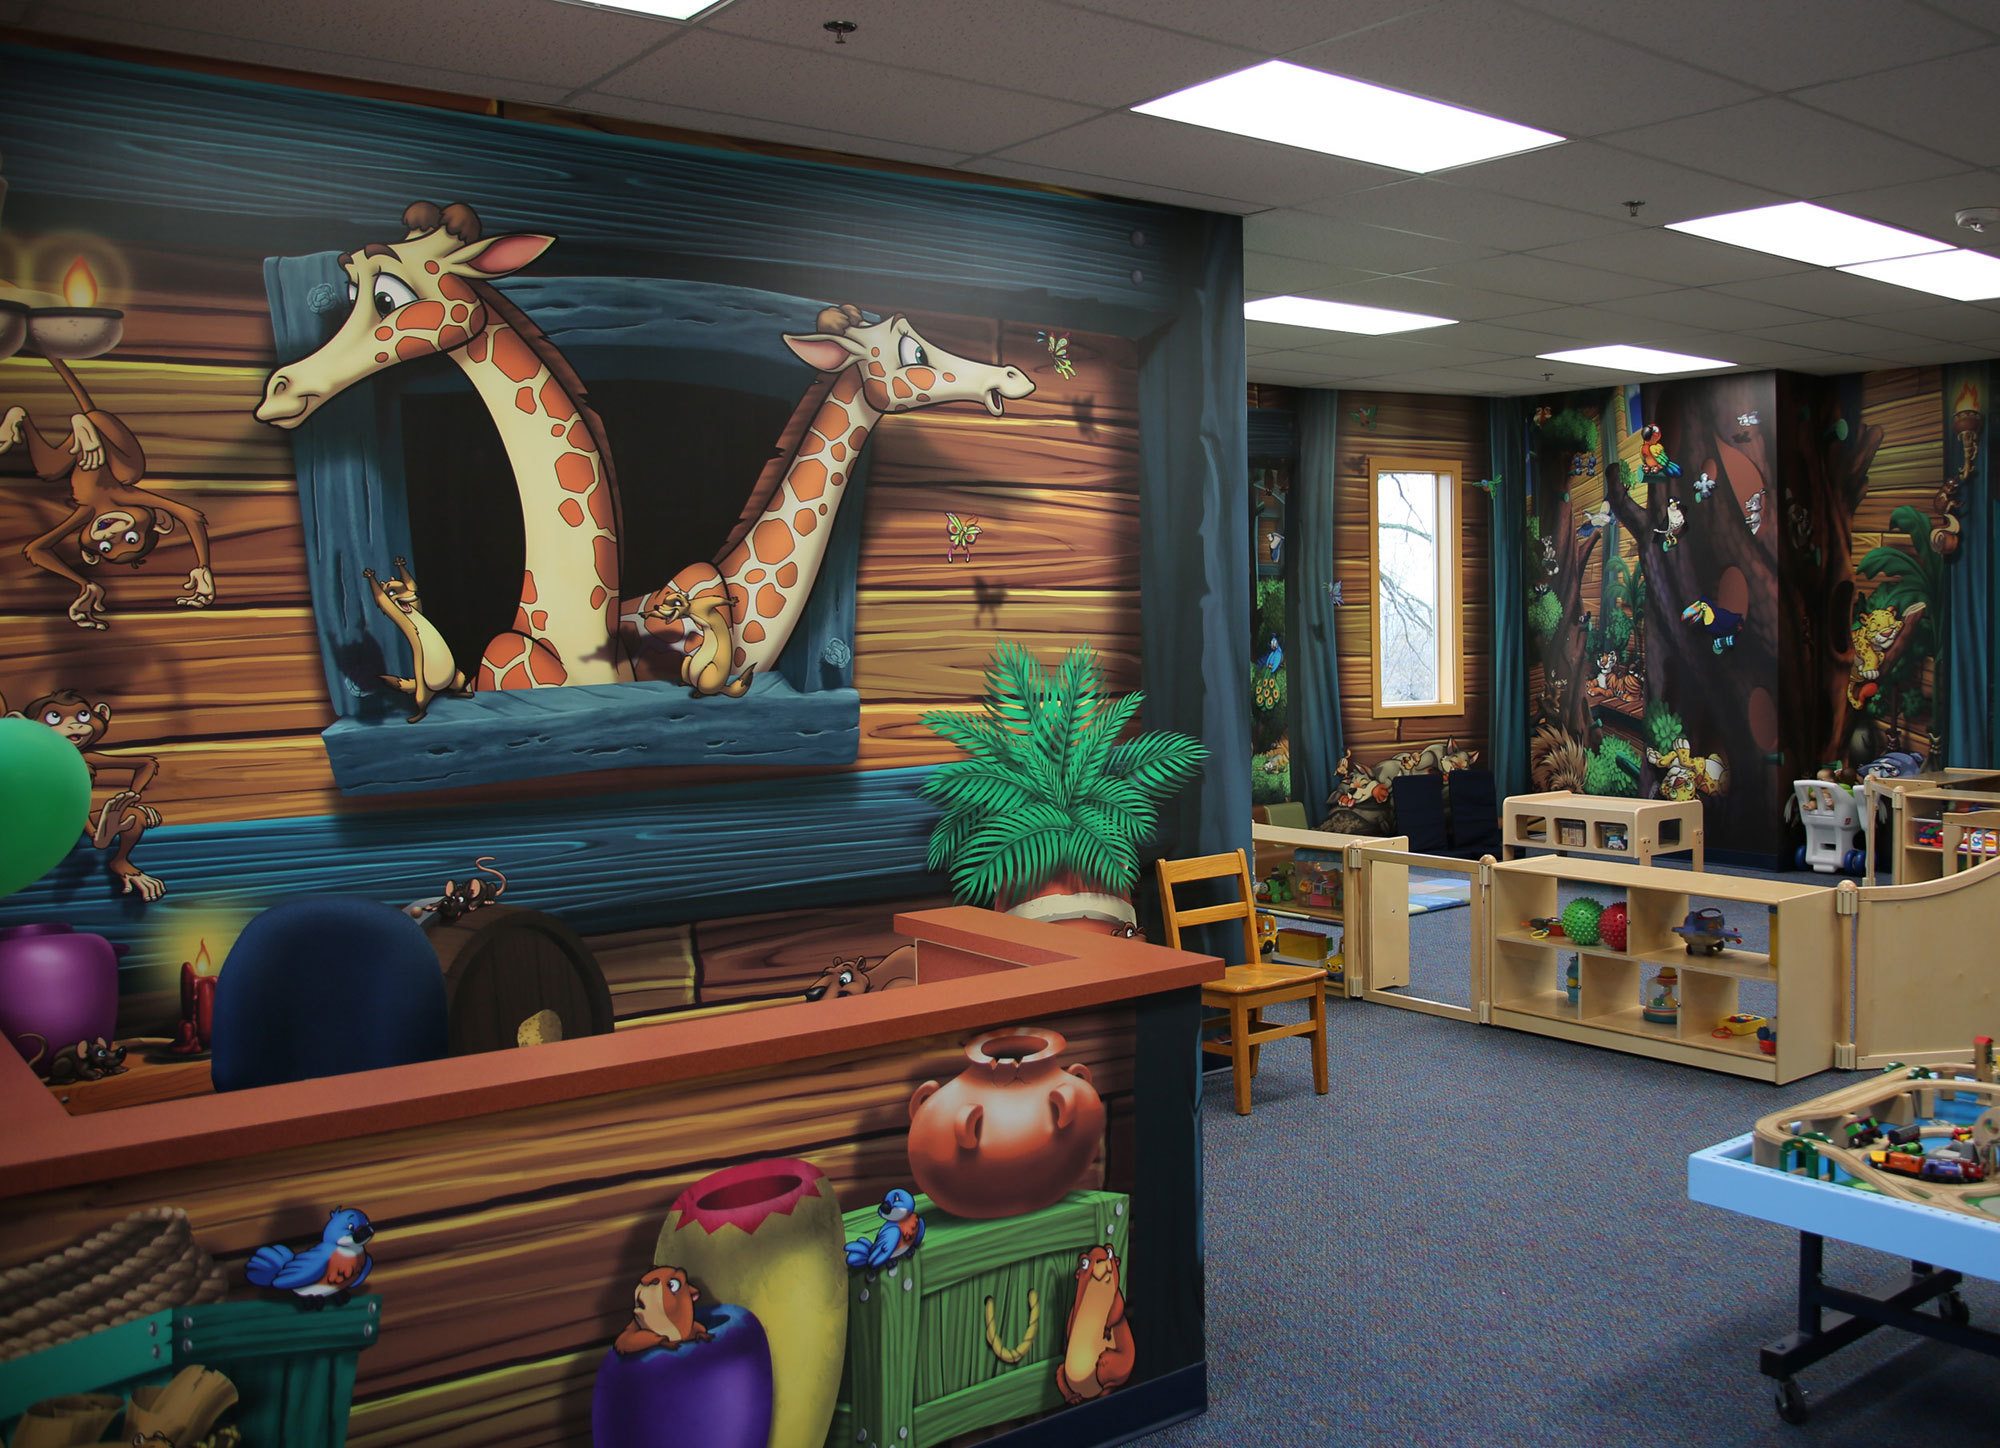 Nursery with a Noah's Ark theme featuring murals with Giraffes, monkeys and more as shown on the Ark.